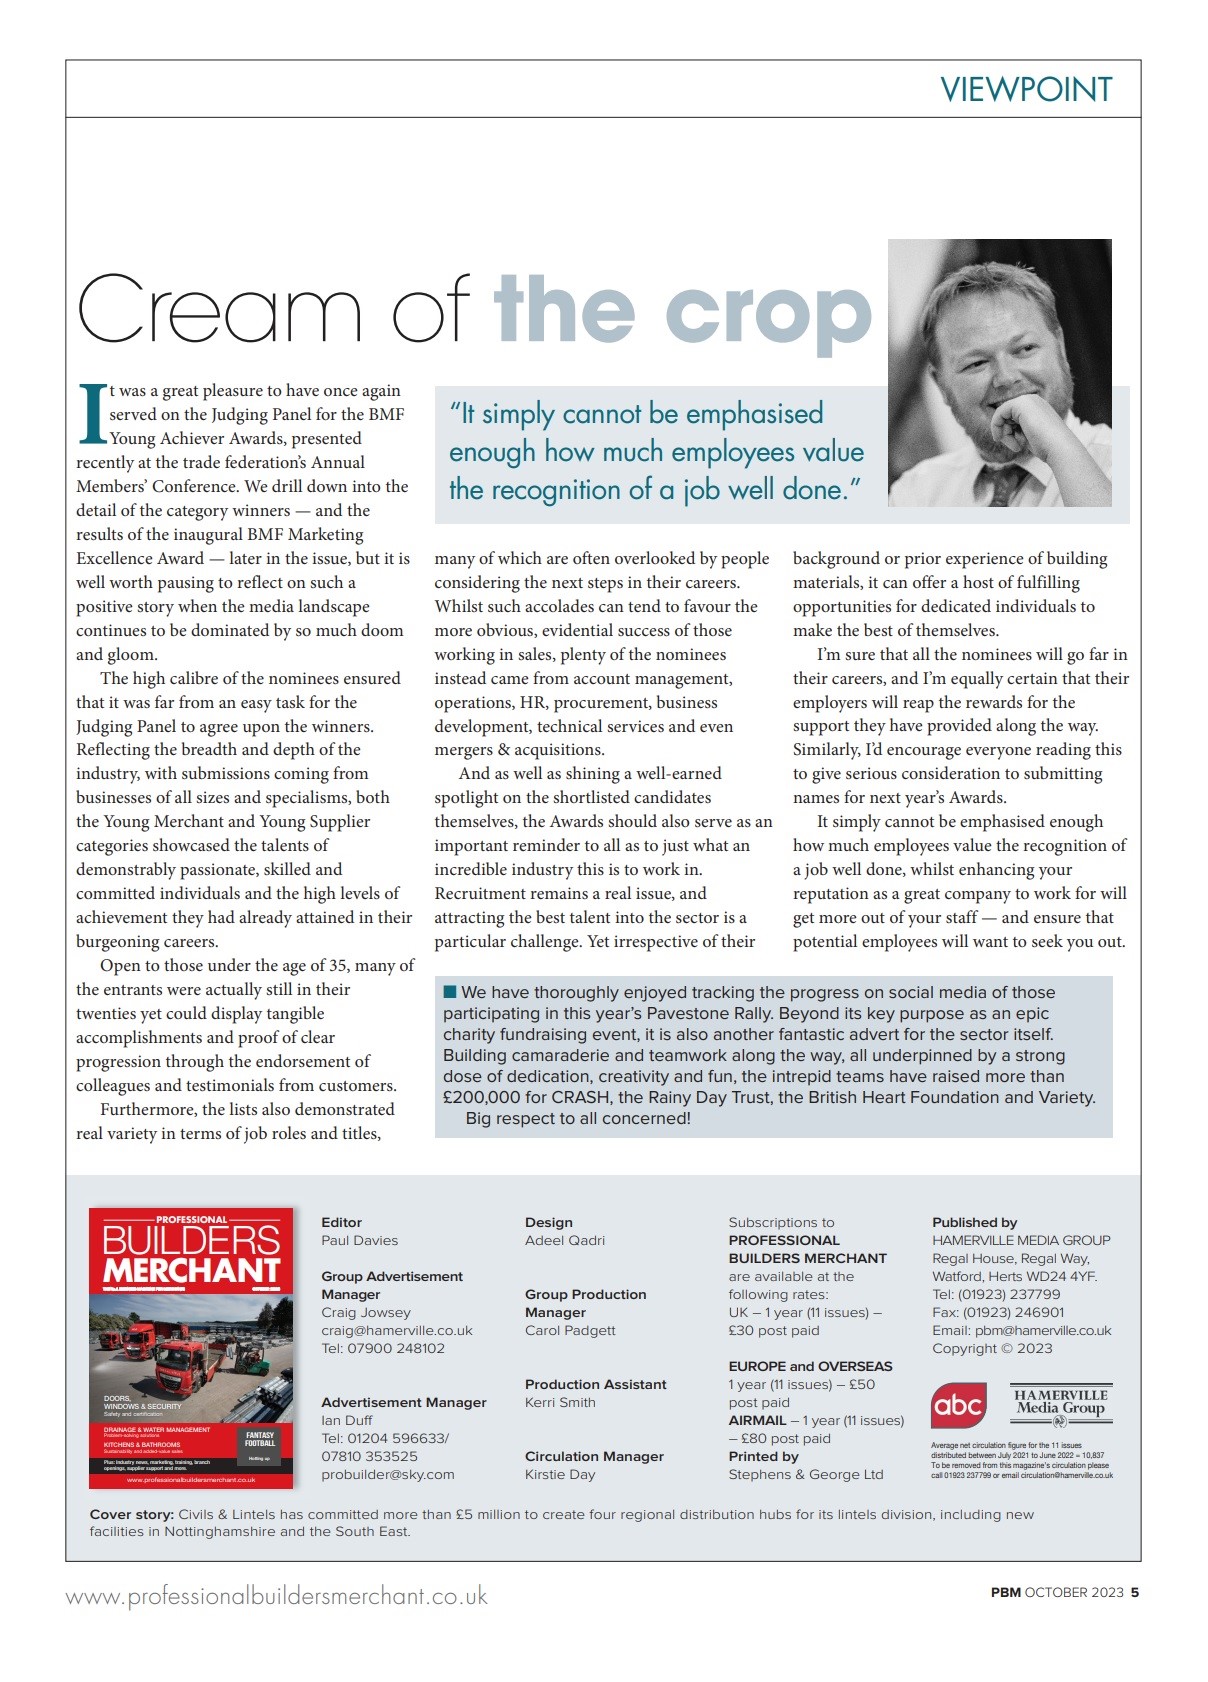 Writing in the October issue of PBM, Editor Paul Davies considered the real breadth and depth of the career opportunities open to individuals - and especially new entrants - within the building materials sector.